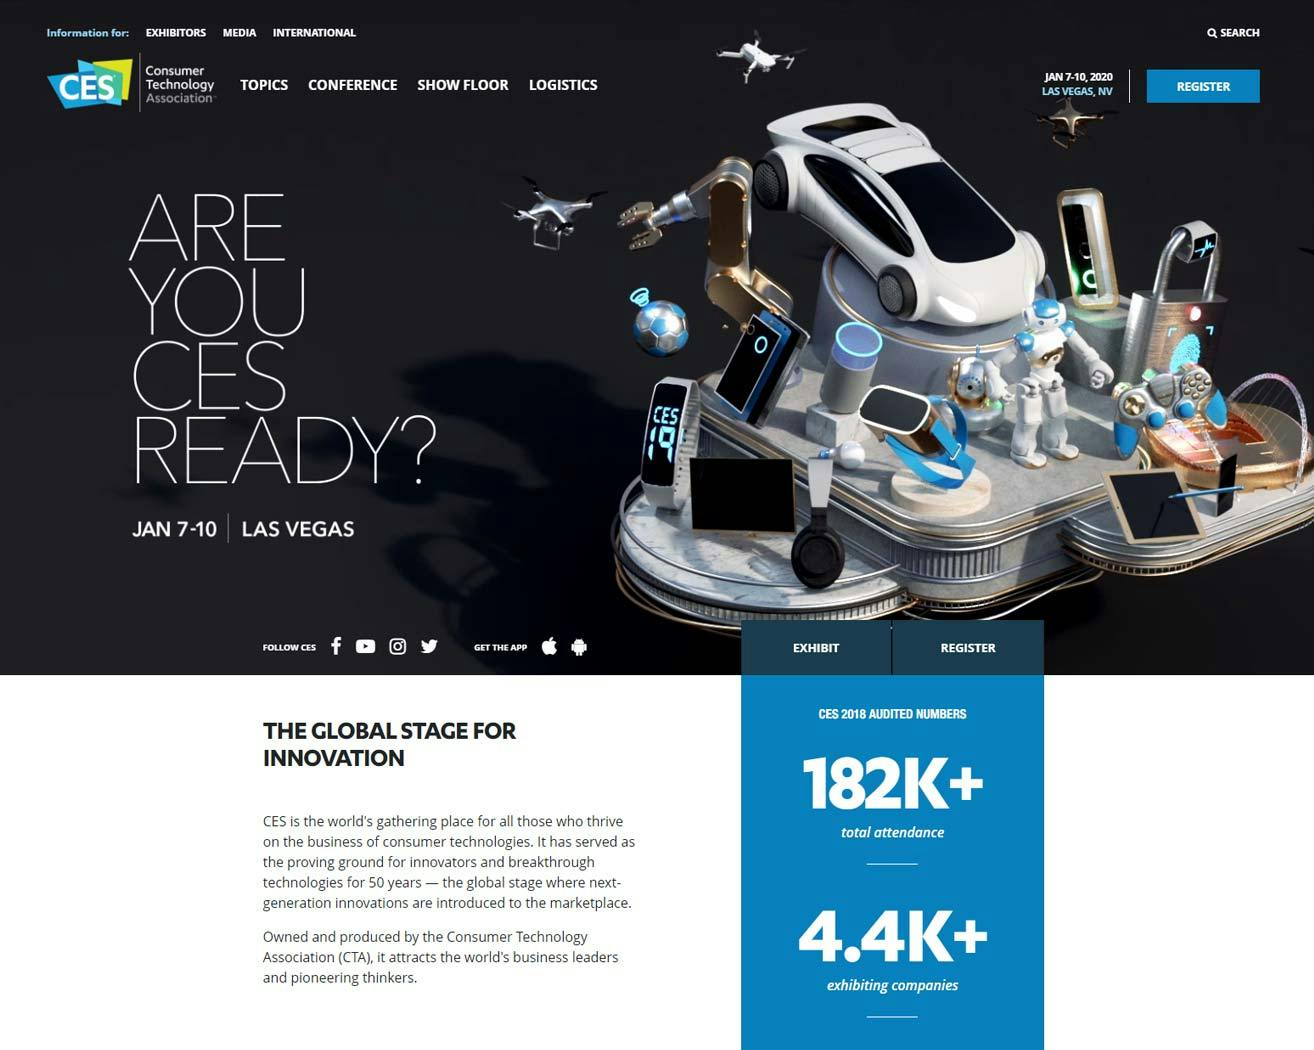 Screenshot showing the CES website.